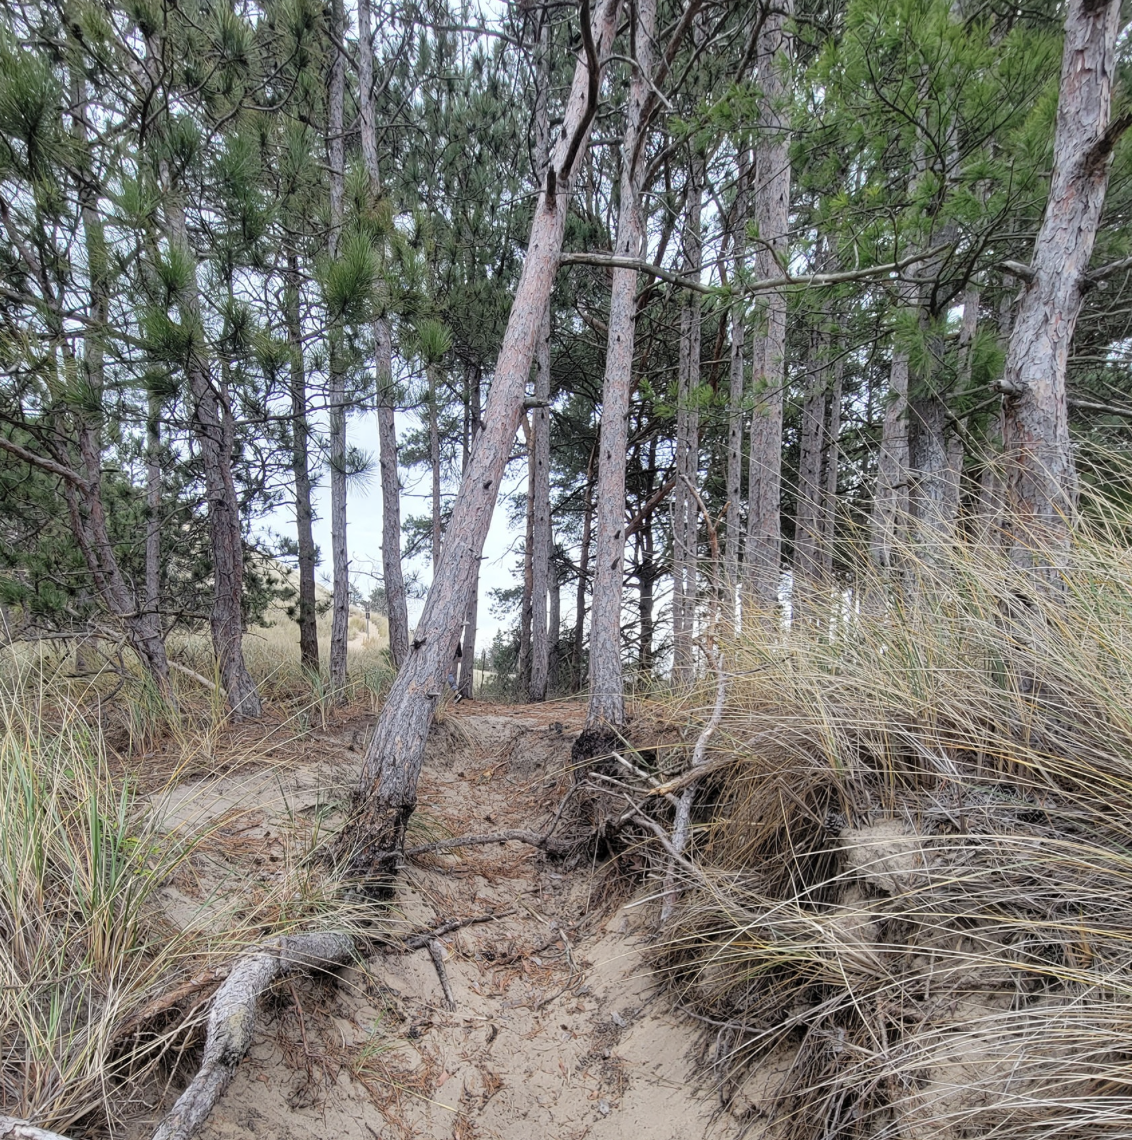 Tall trees with exposed roots and a sandy trail in Michigan